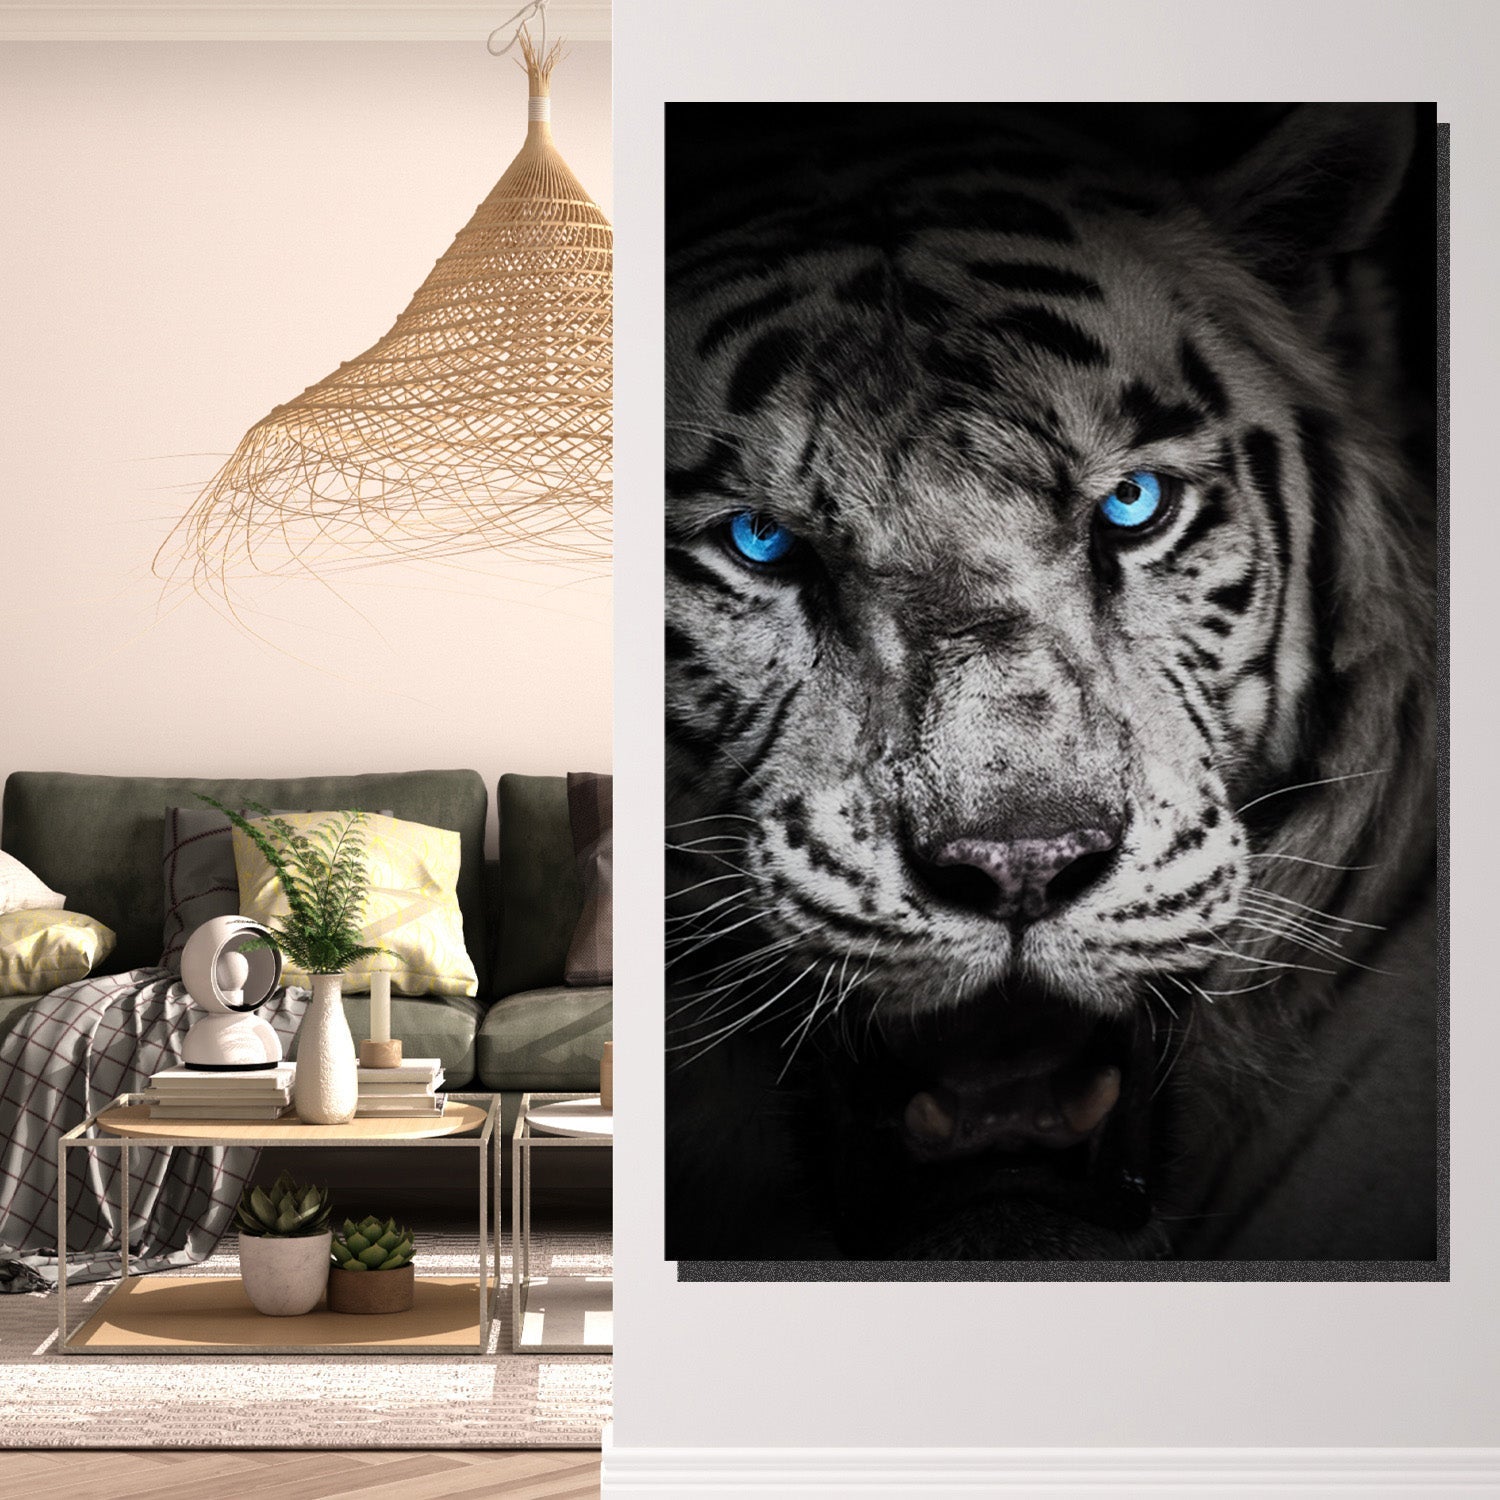 https://cdn.shopify.com/s/files/1/0387/9986/8044/products/BlueEyedTigerCanvasArtprintStretched-4.jpg